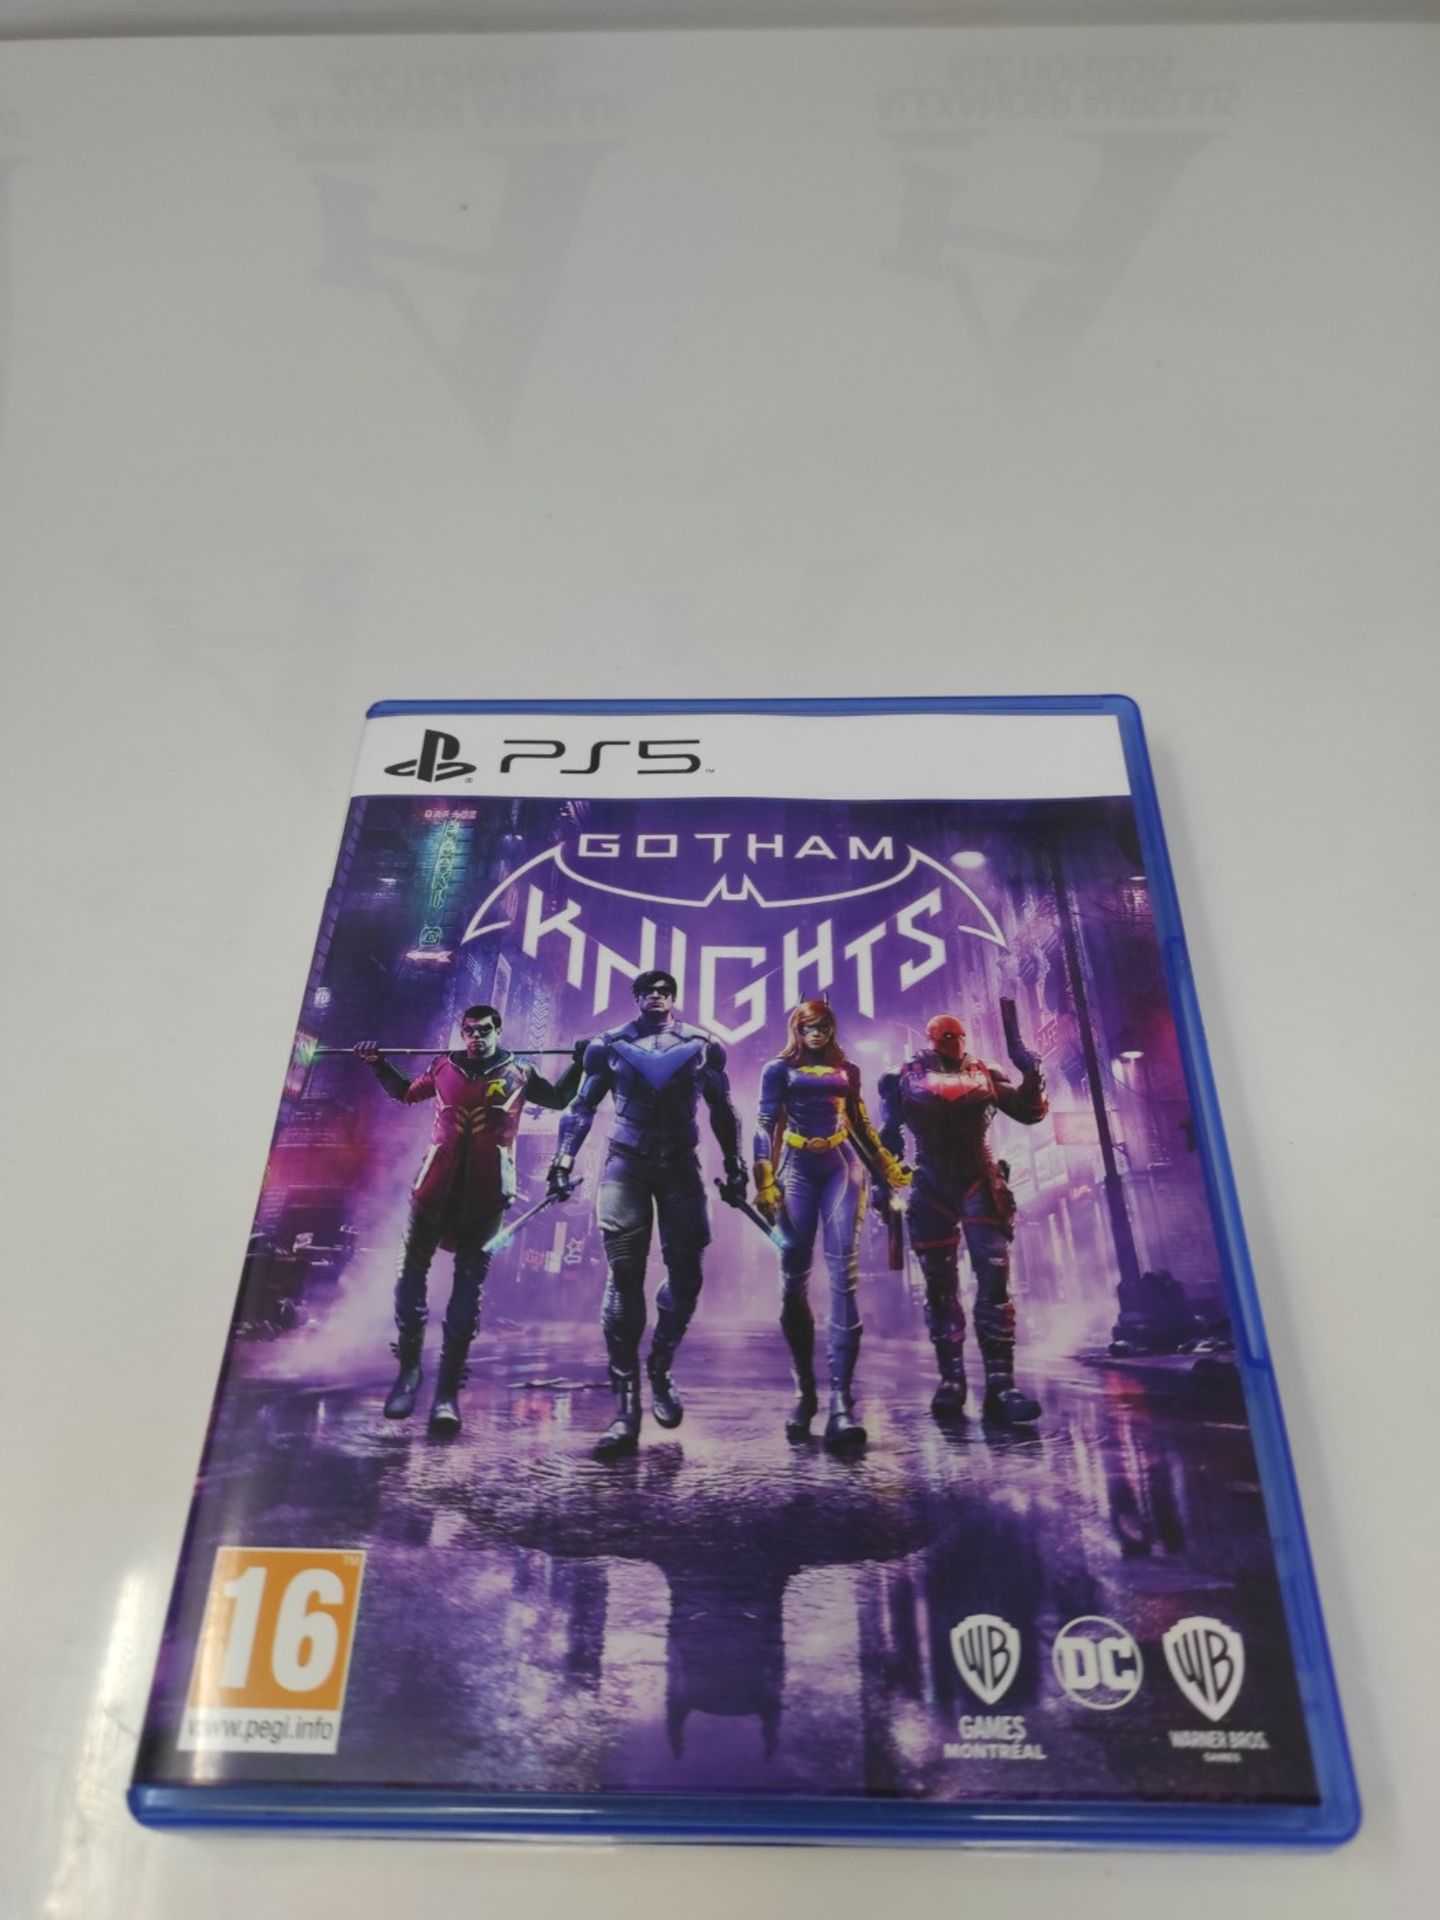 Gotham Knights is a video game available on the PlayStation 5. - Image 2 of 3